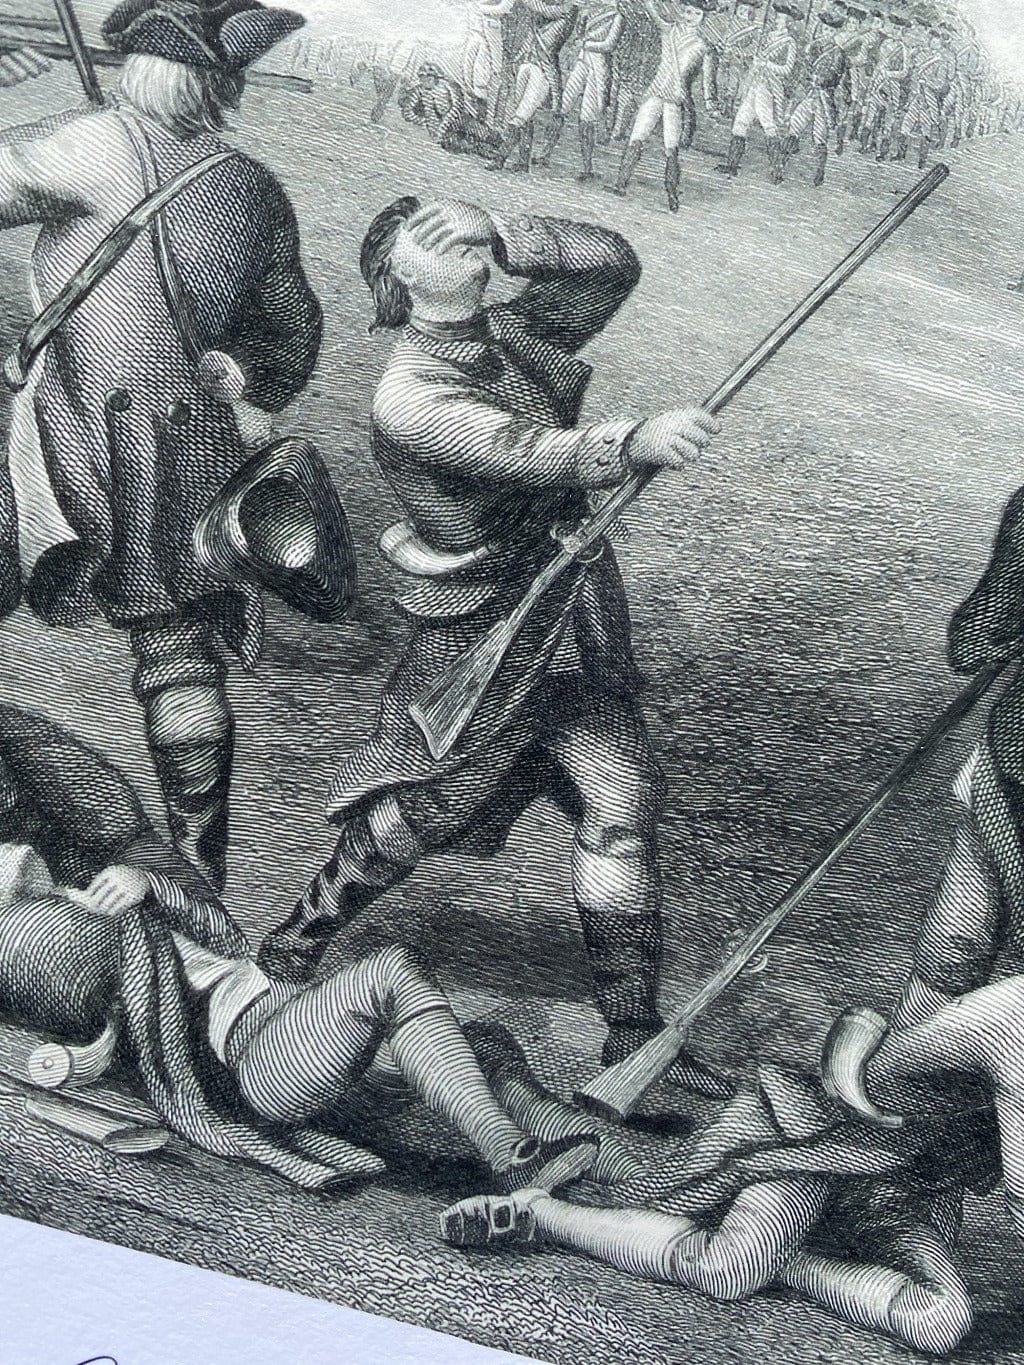 Closeup of fine art reproduction of the "Battle of Lexington 1775" Archival print from the History list store